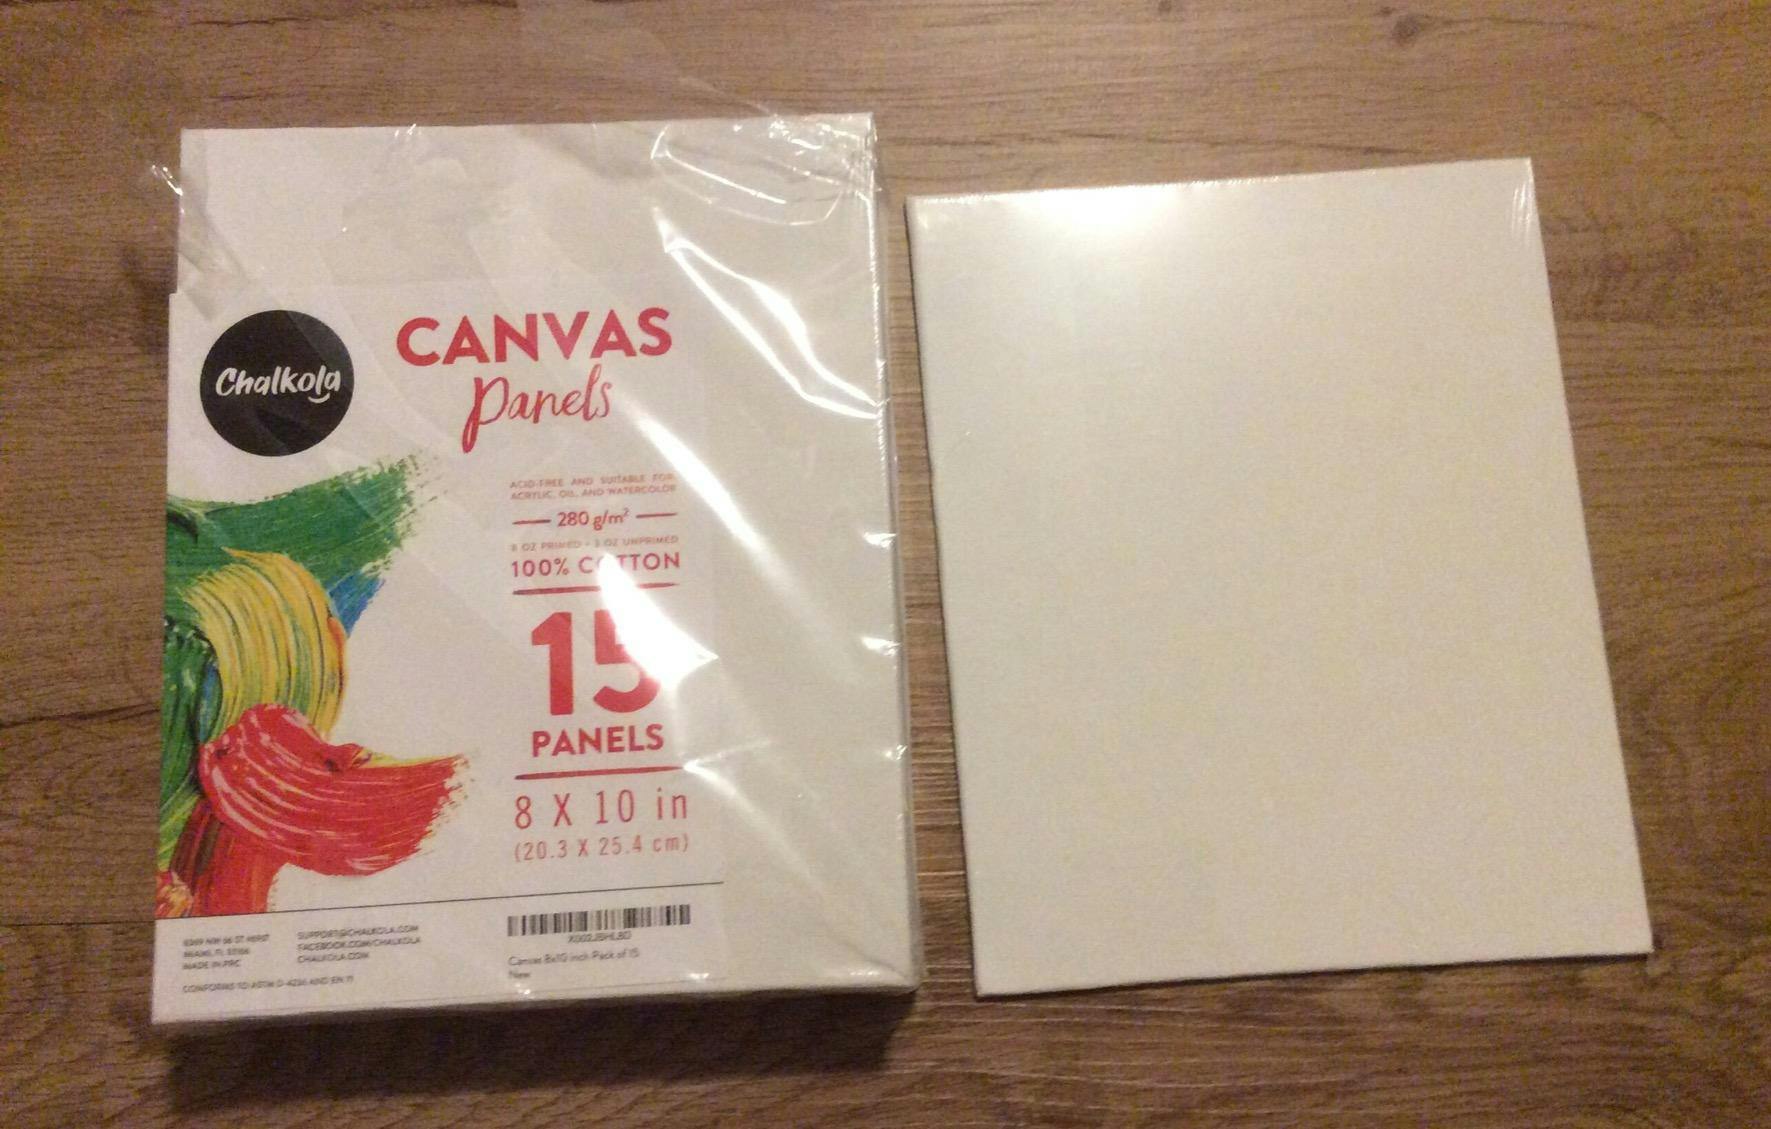 Chalkola Paint Canvases for Painting - (15 Pack) 8x10 Canvas